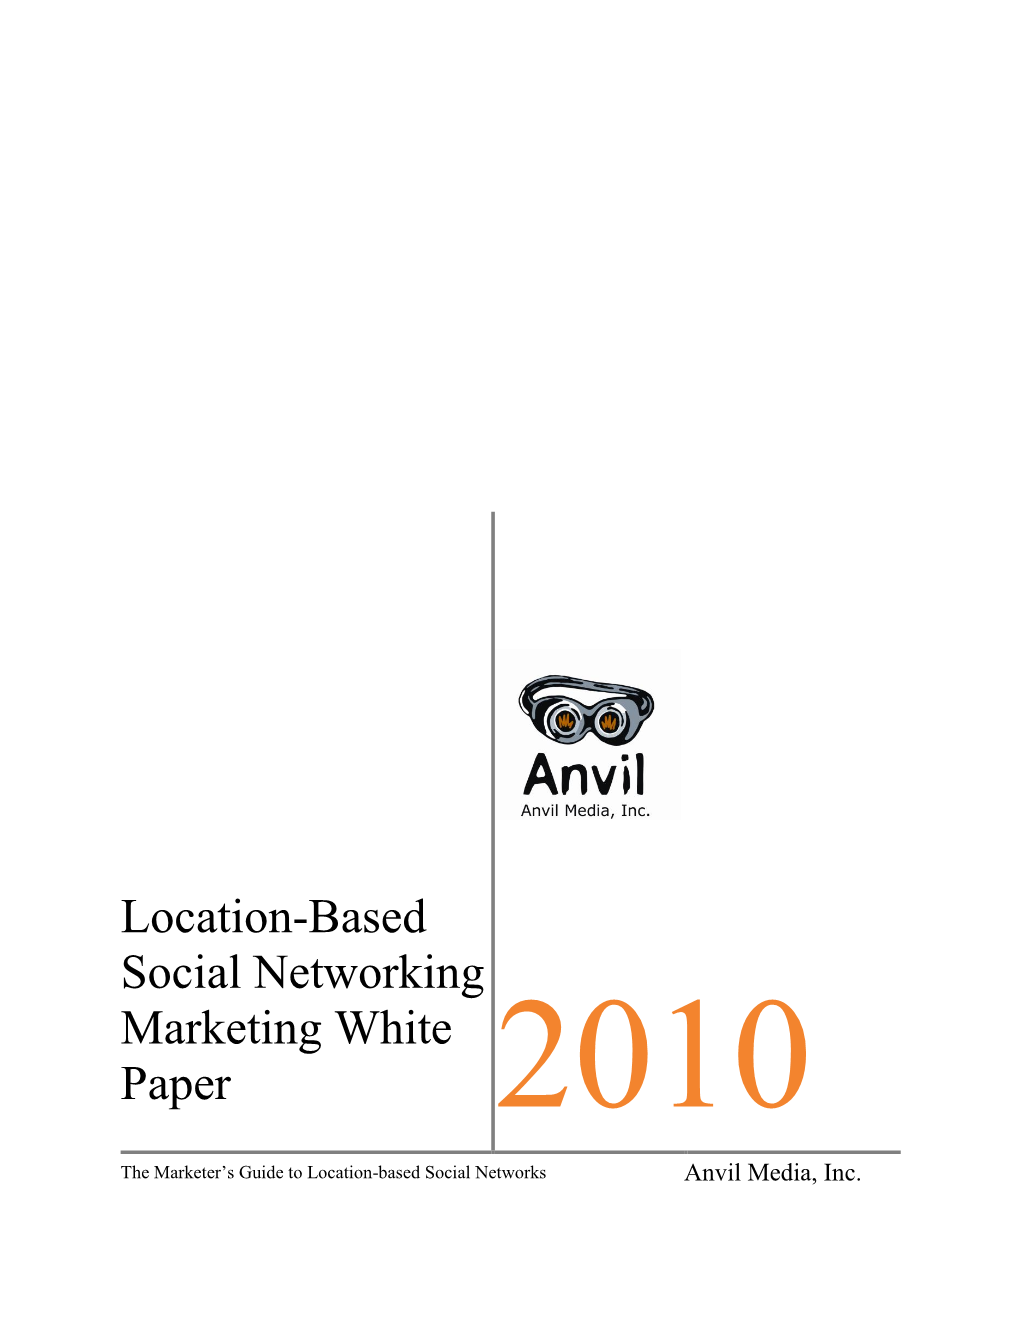 Location-Based Social Networking Marketing White Paper